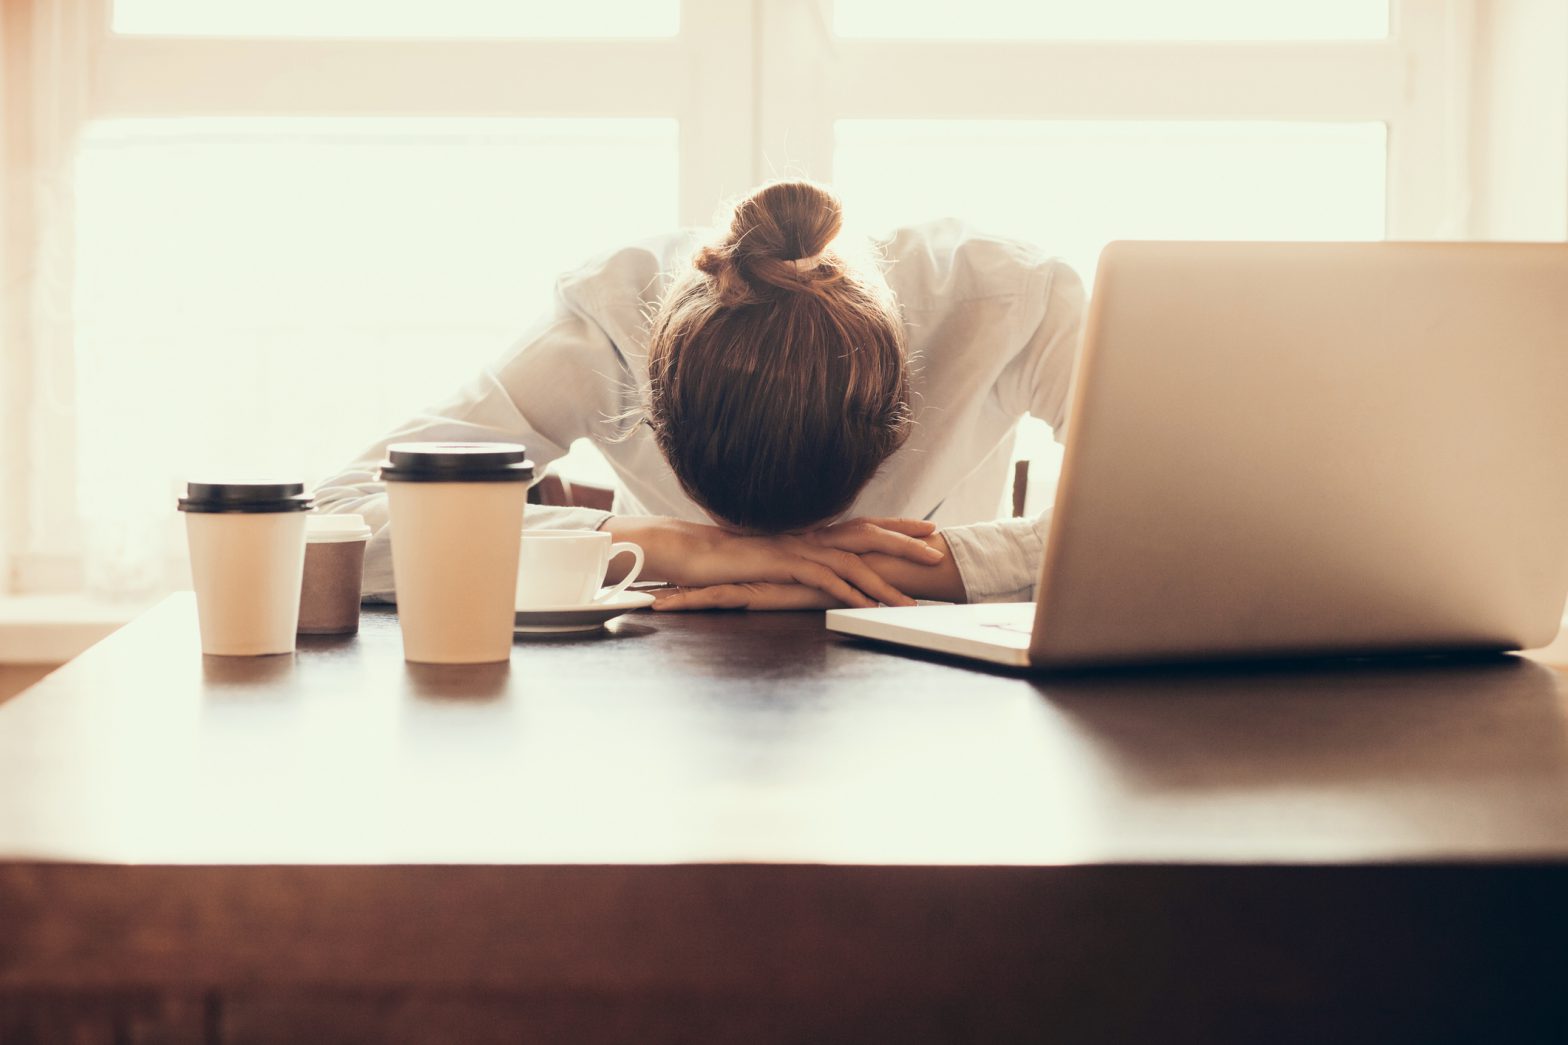 A woman sitting at an office desk with her head in her hands, having a migraine attack